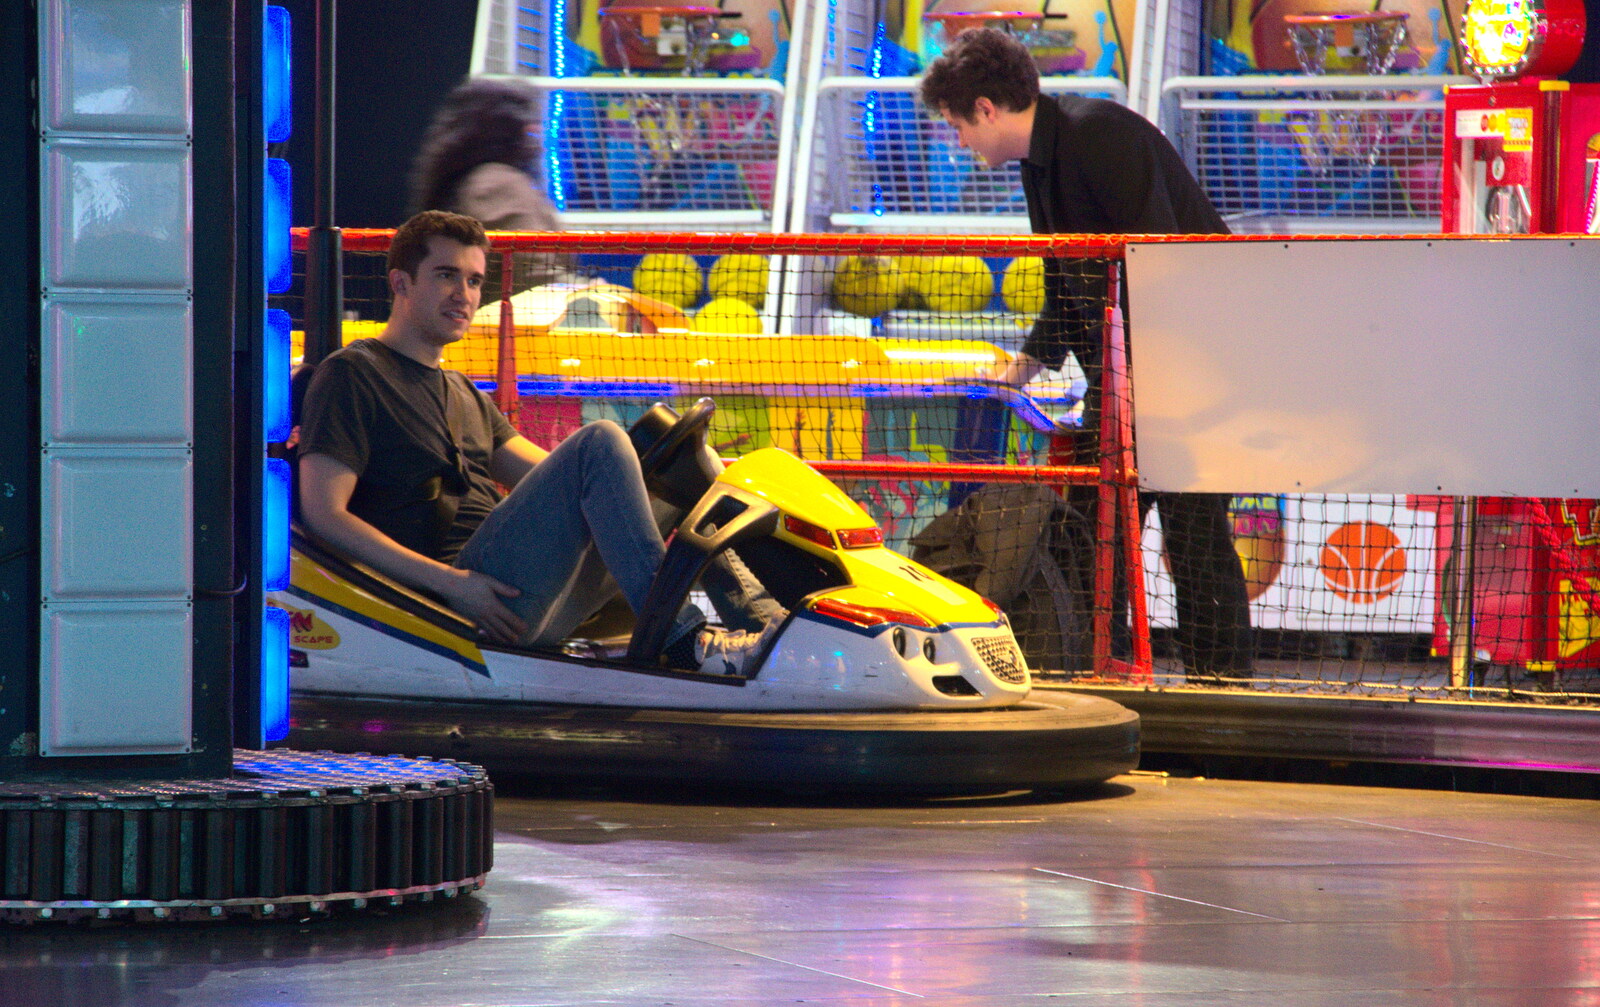 Ben ina dodgem from A Team Outing at Namco Funscape, South Bank, London - 27th March 2019